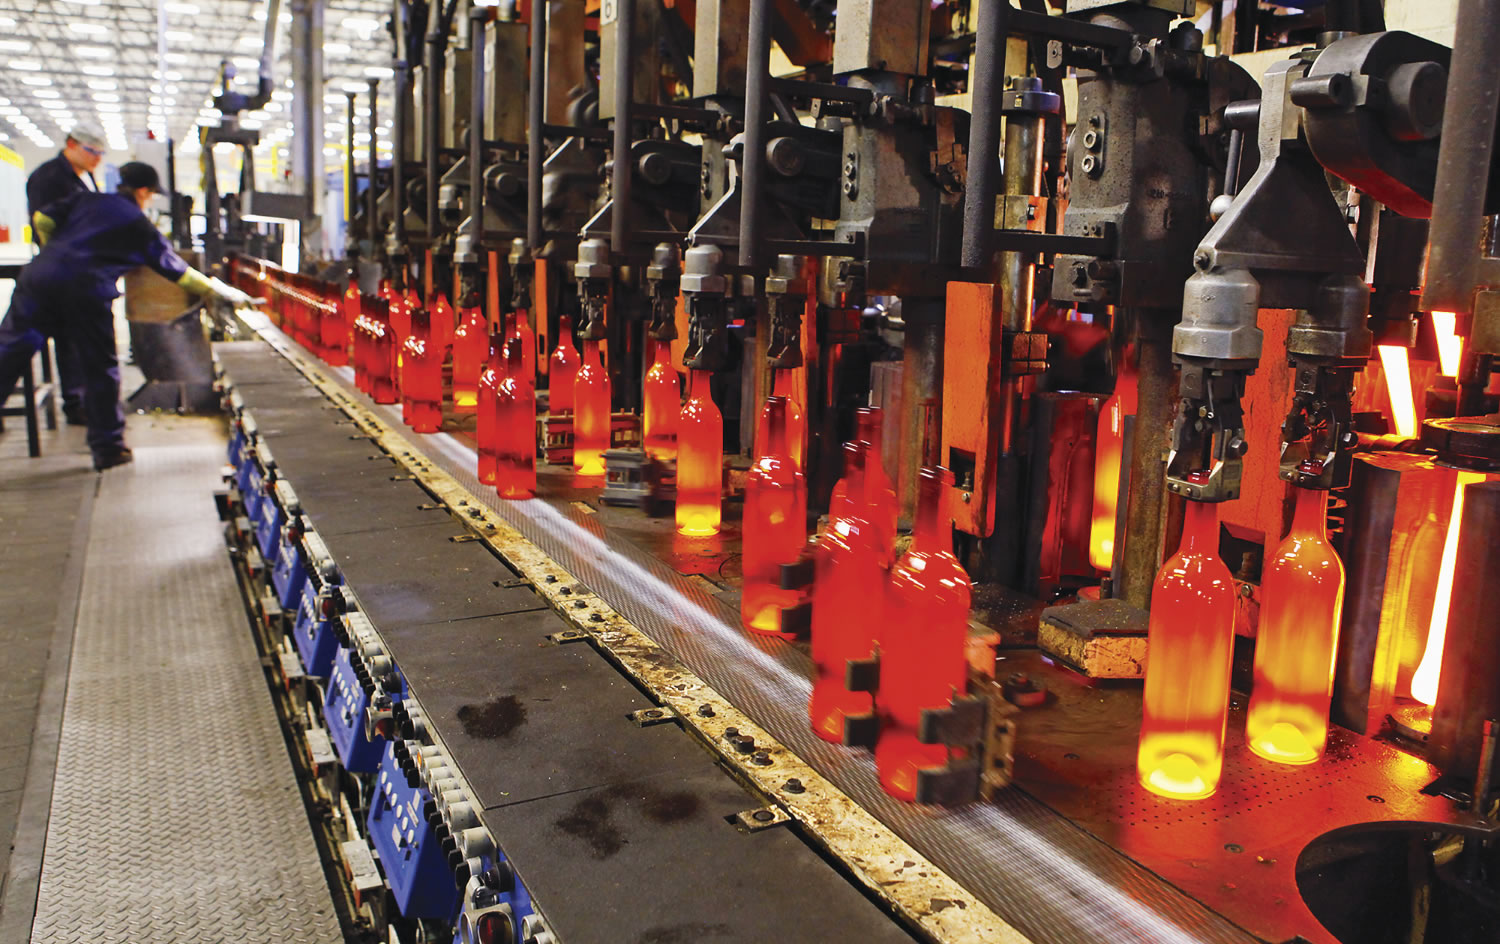 Bottles come off the production line red-hot and glowing at the Bennu Glass factory at the Port of Kalama.